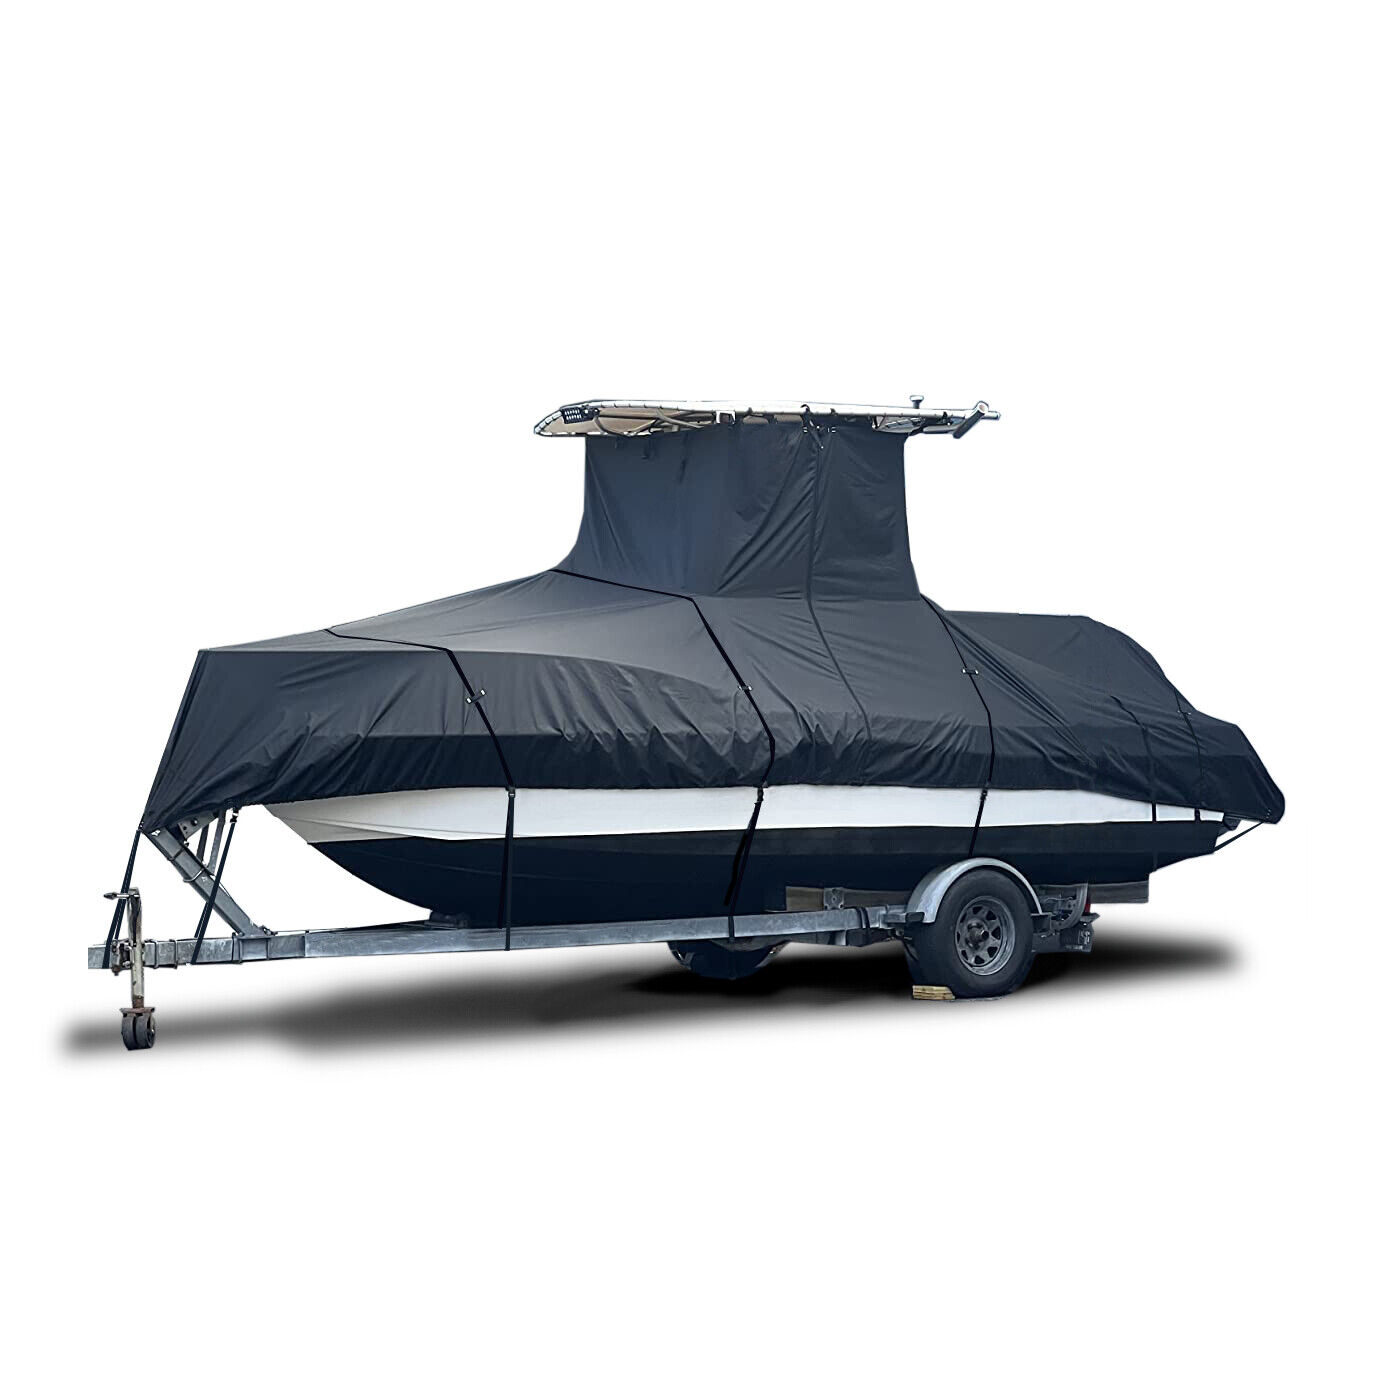 EliteShield Heavy Duty Center Console T-Top under roof heavy duty Boat Cover